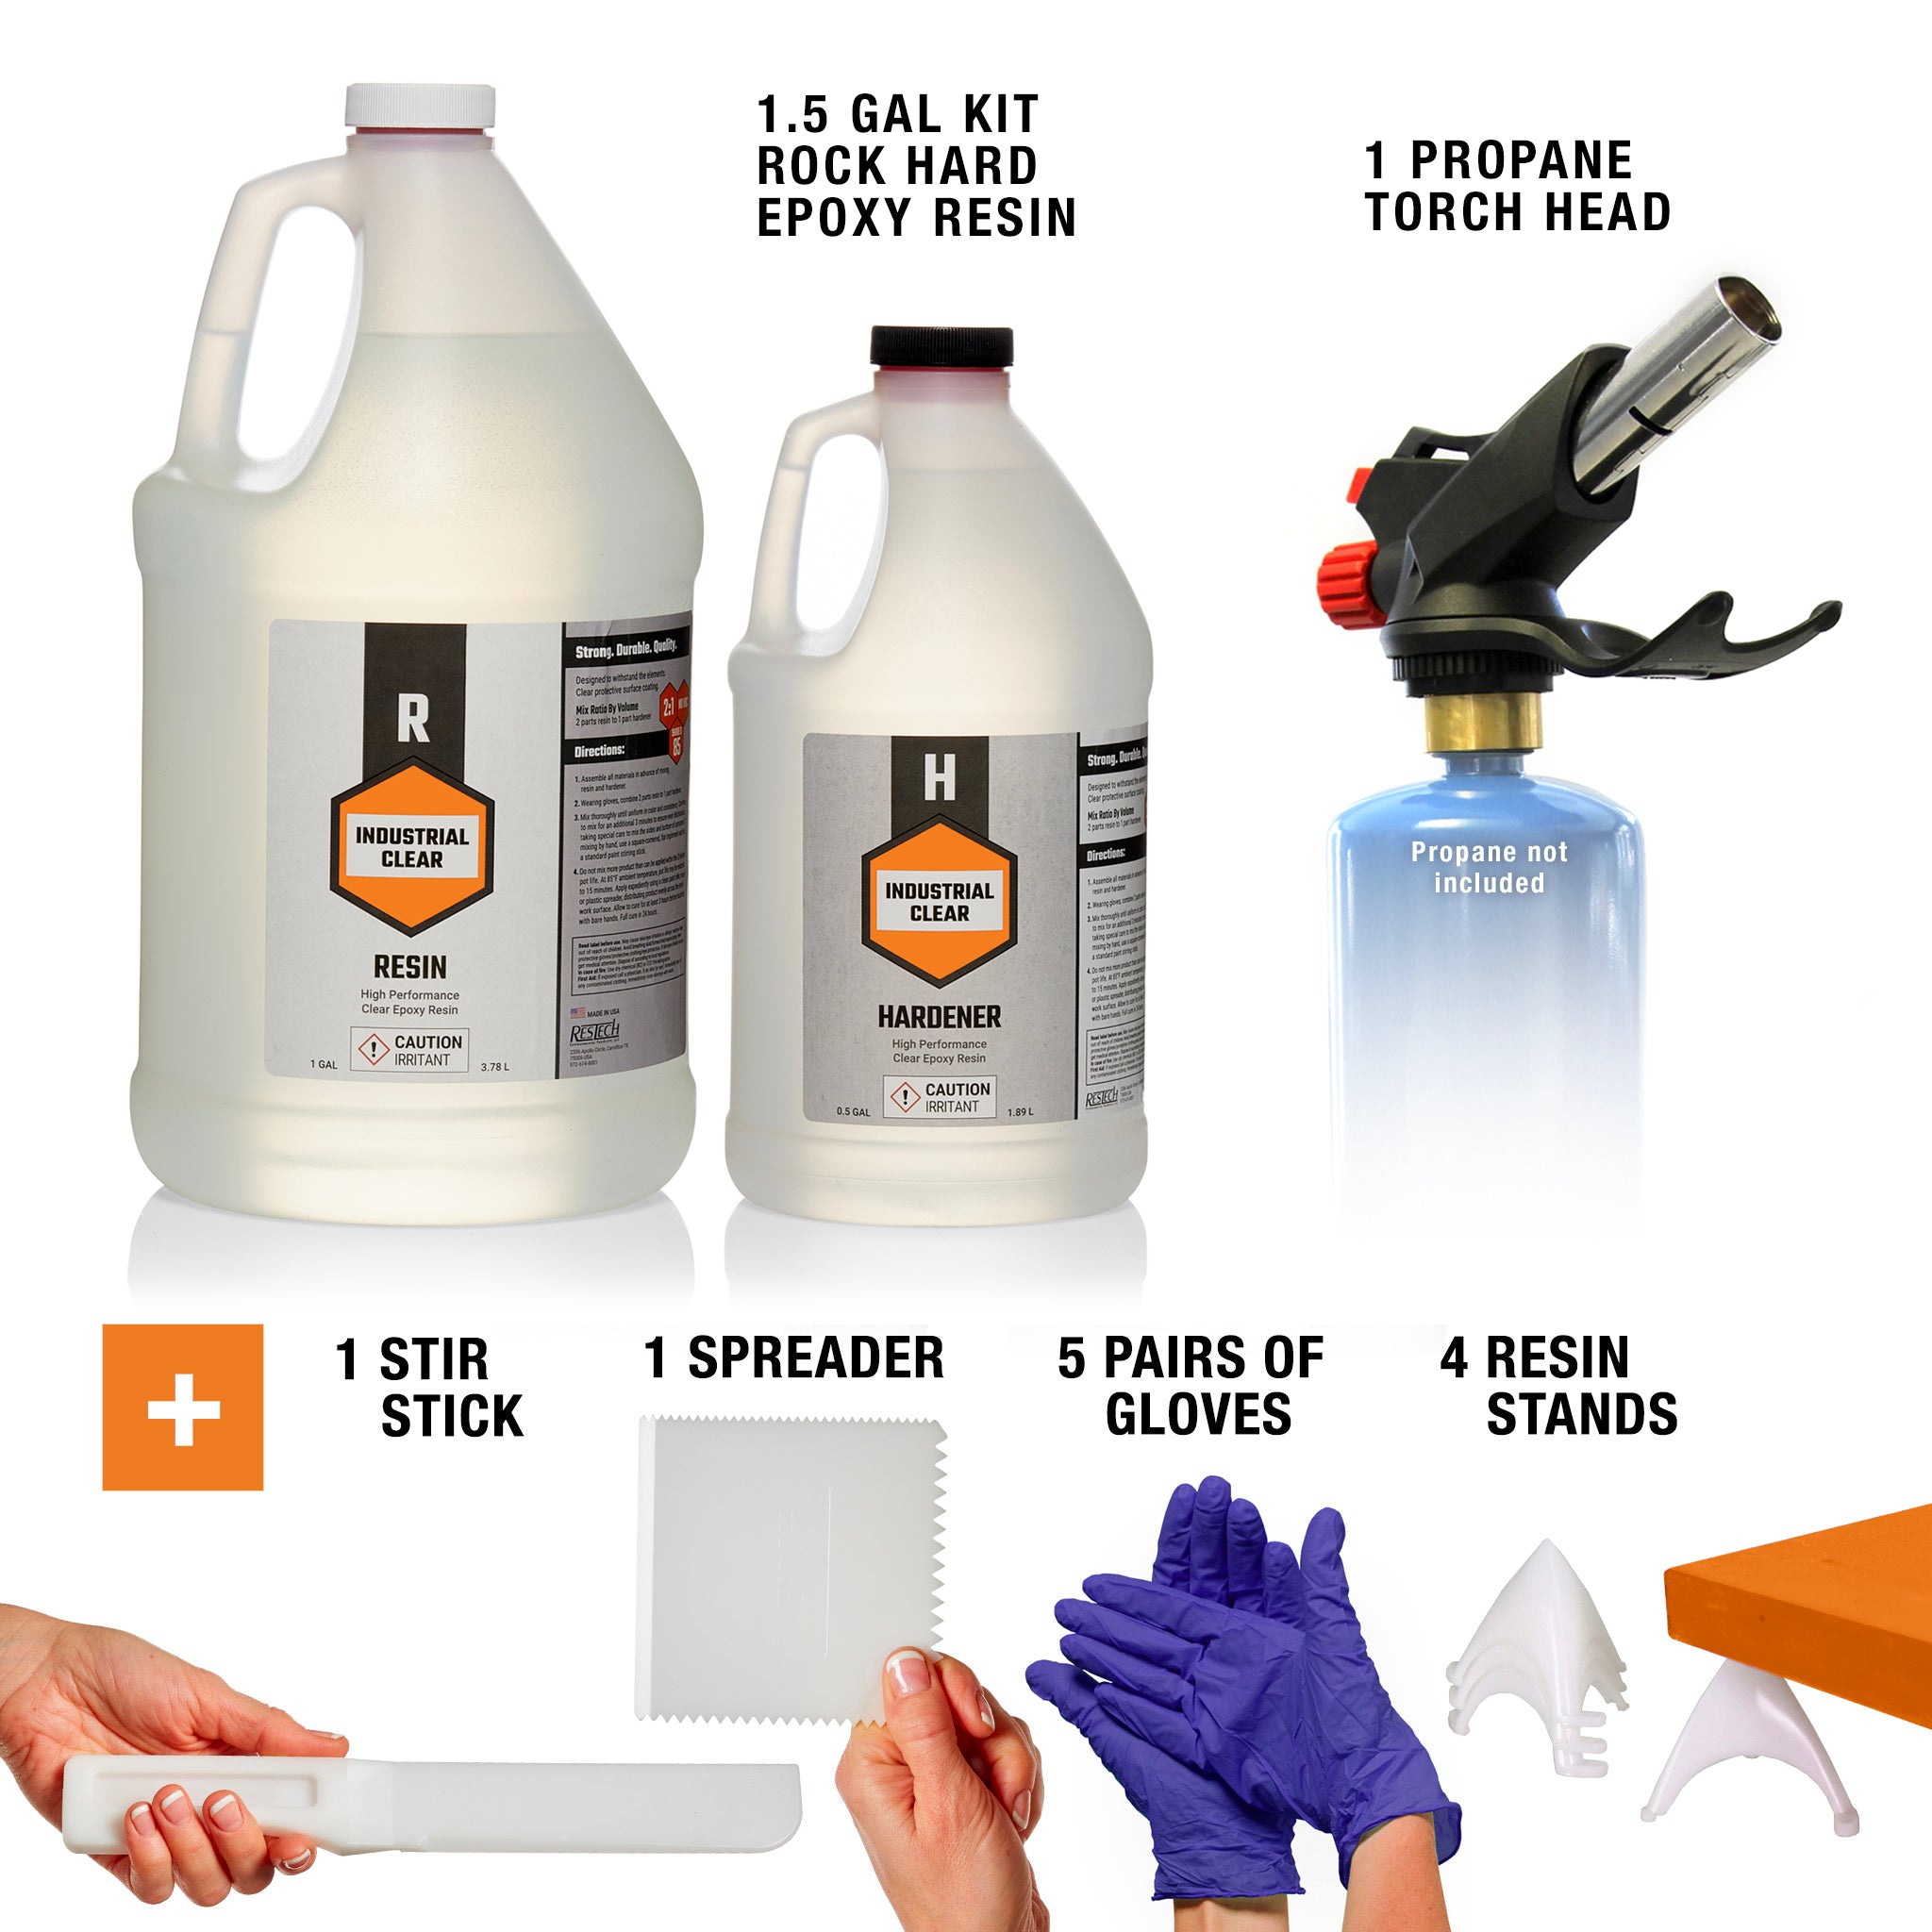 1 Gallon, Table Top & Art Clear Coating Epoxy Resin Kit